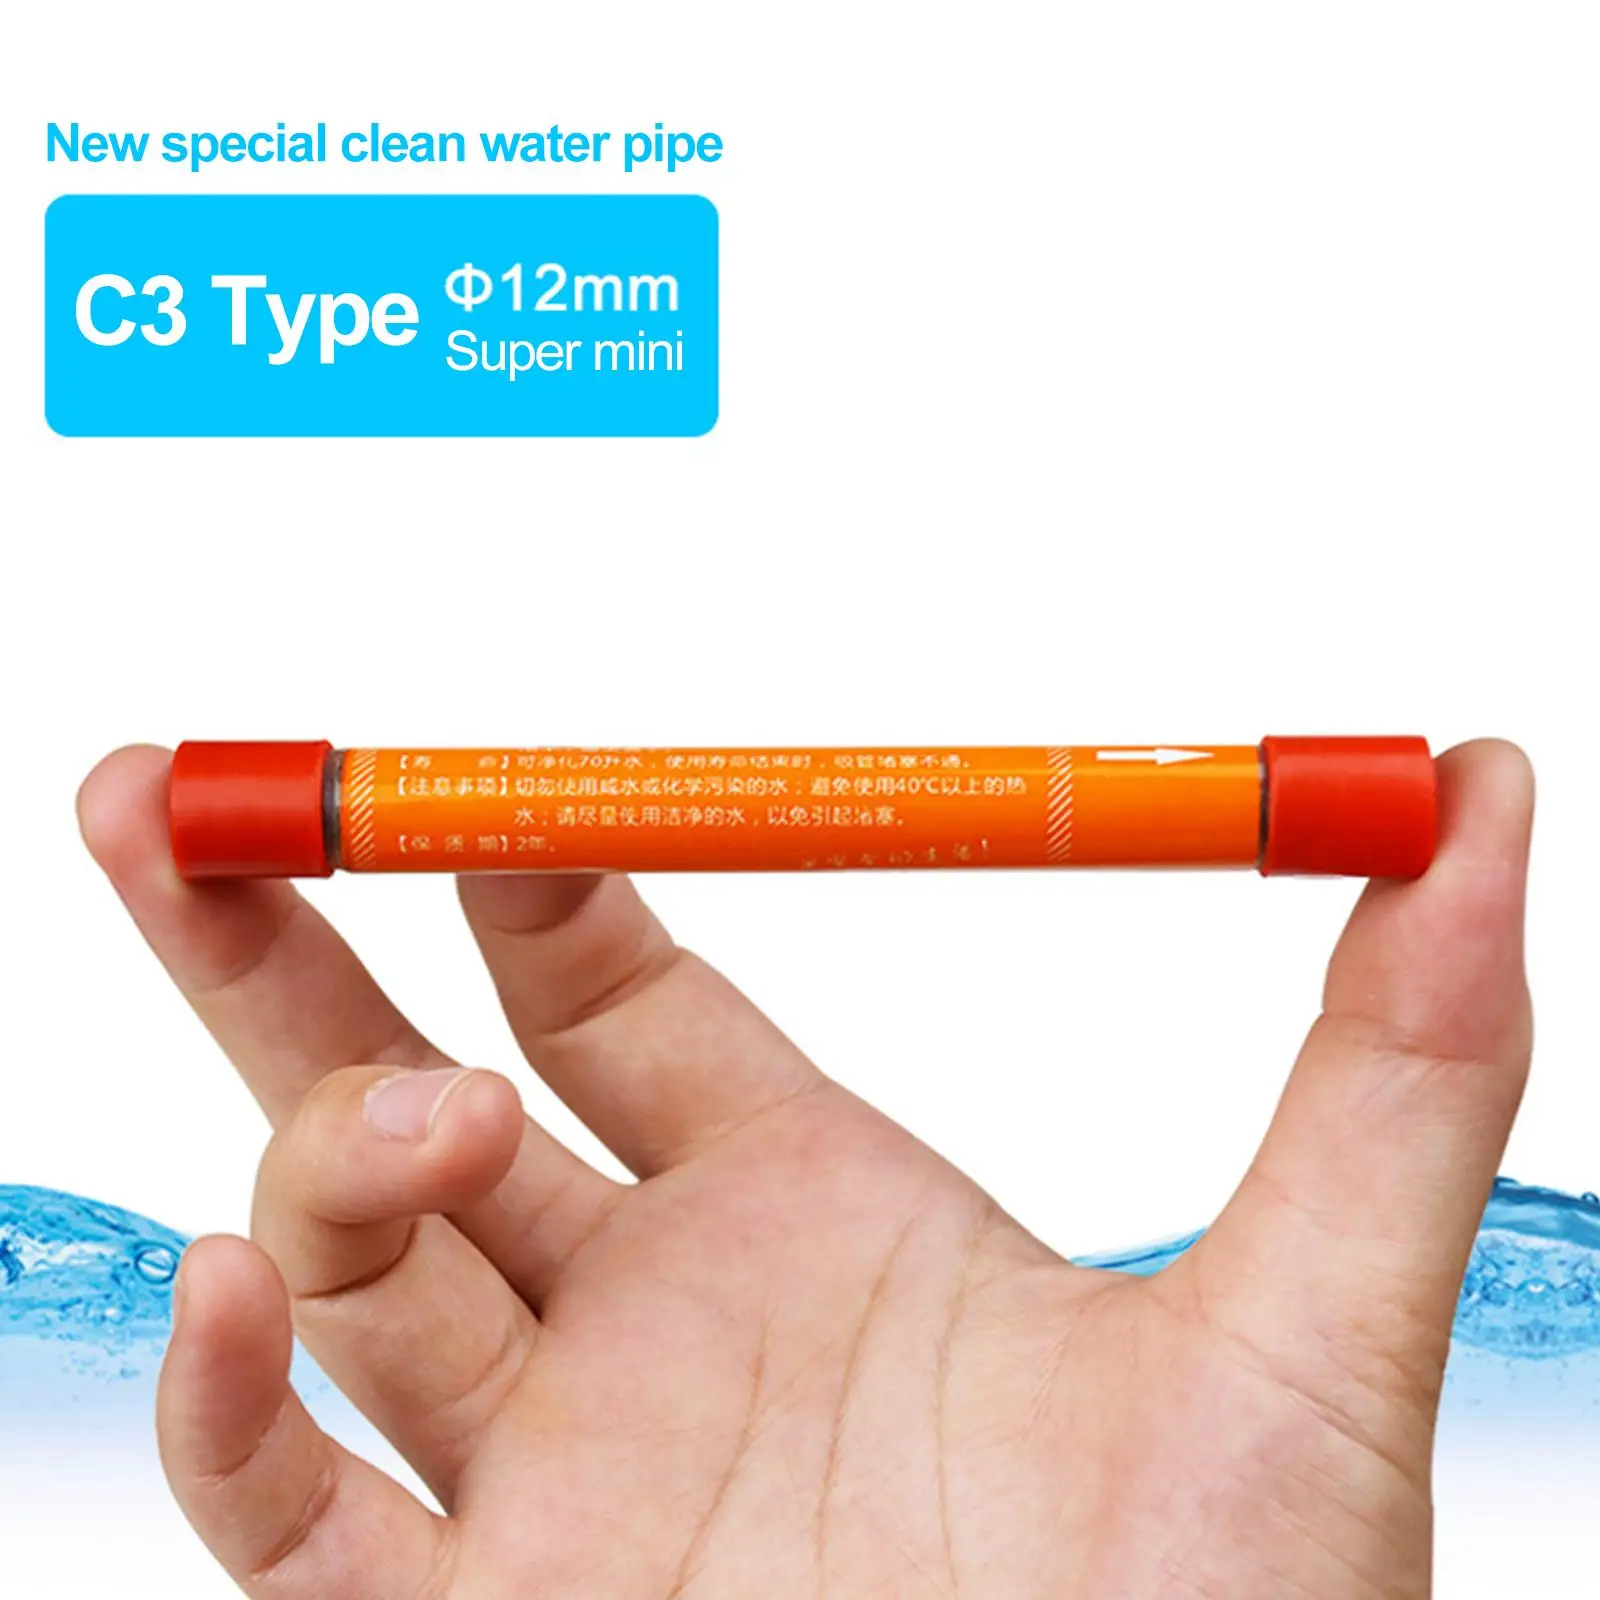 Pocket Water Purification Pipette Pen Portable Mini Straw Water Purifier Camping Outdoor Water Straw Filter Safety Survival Tool